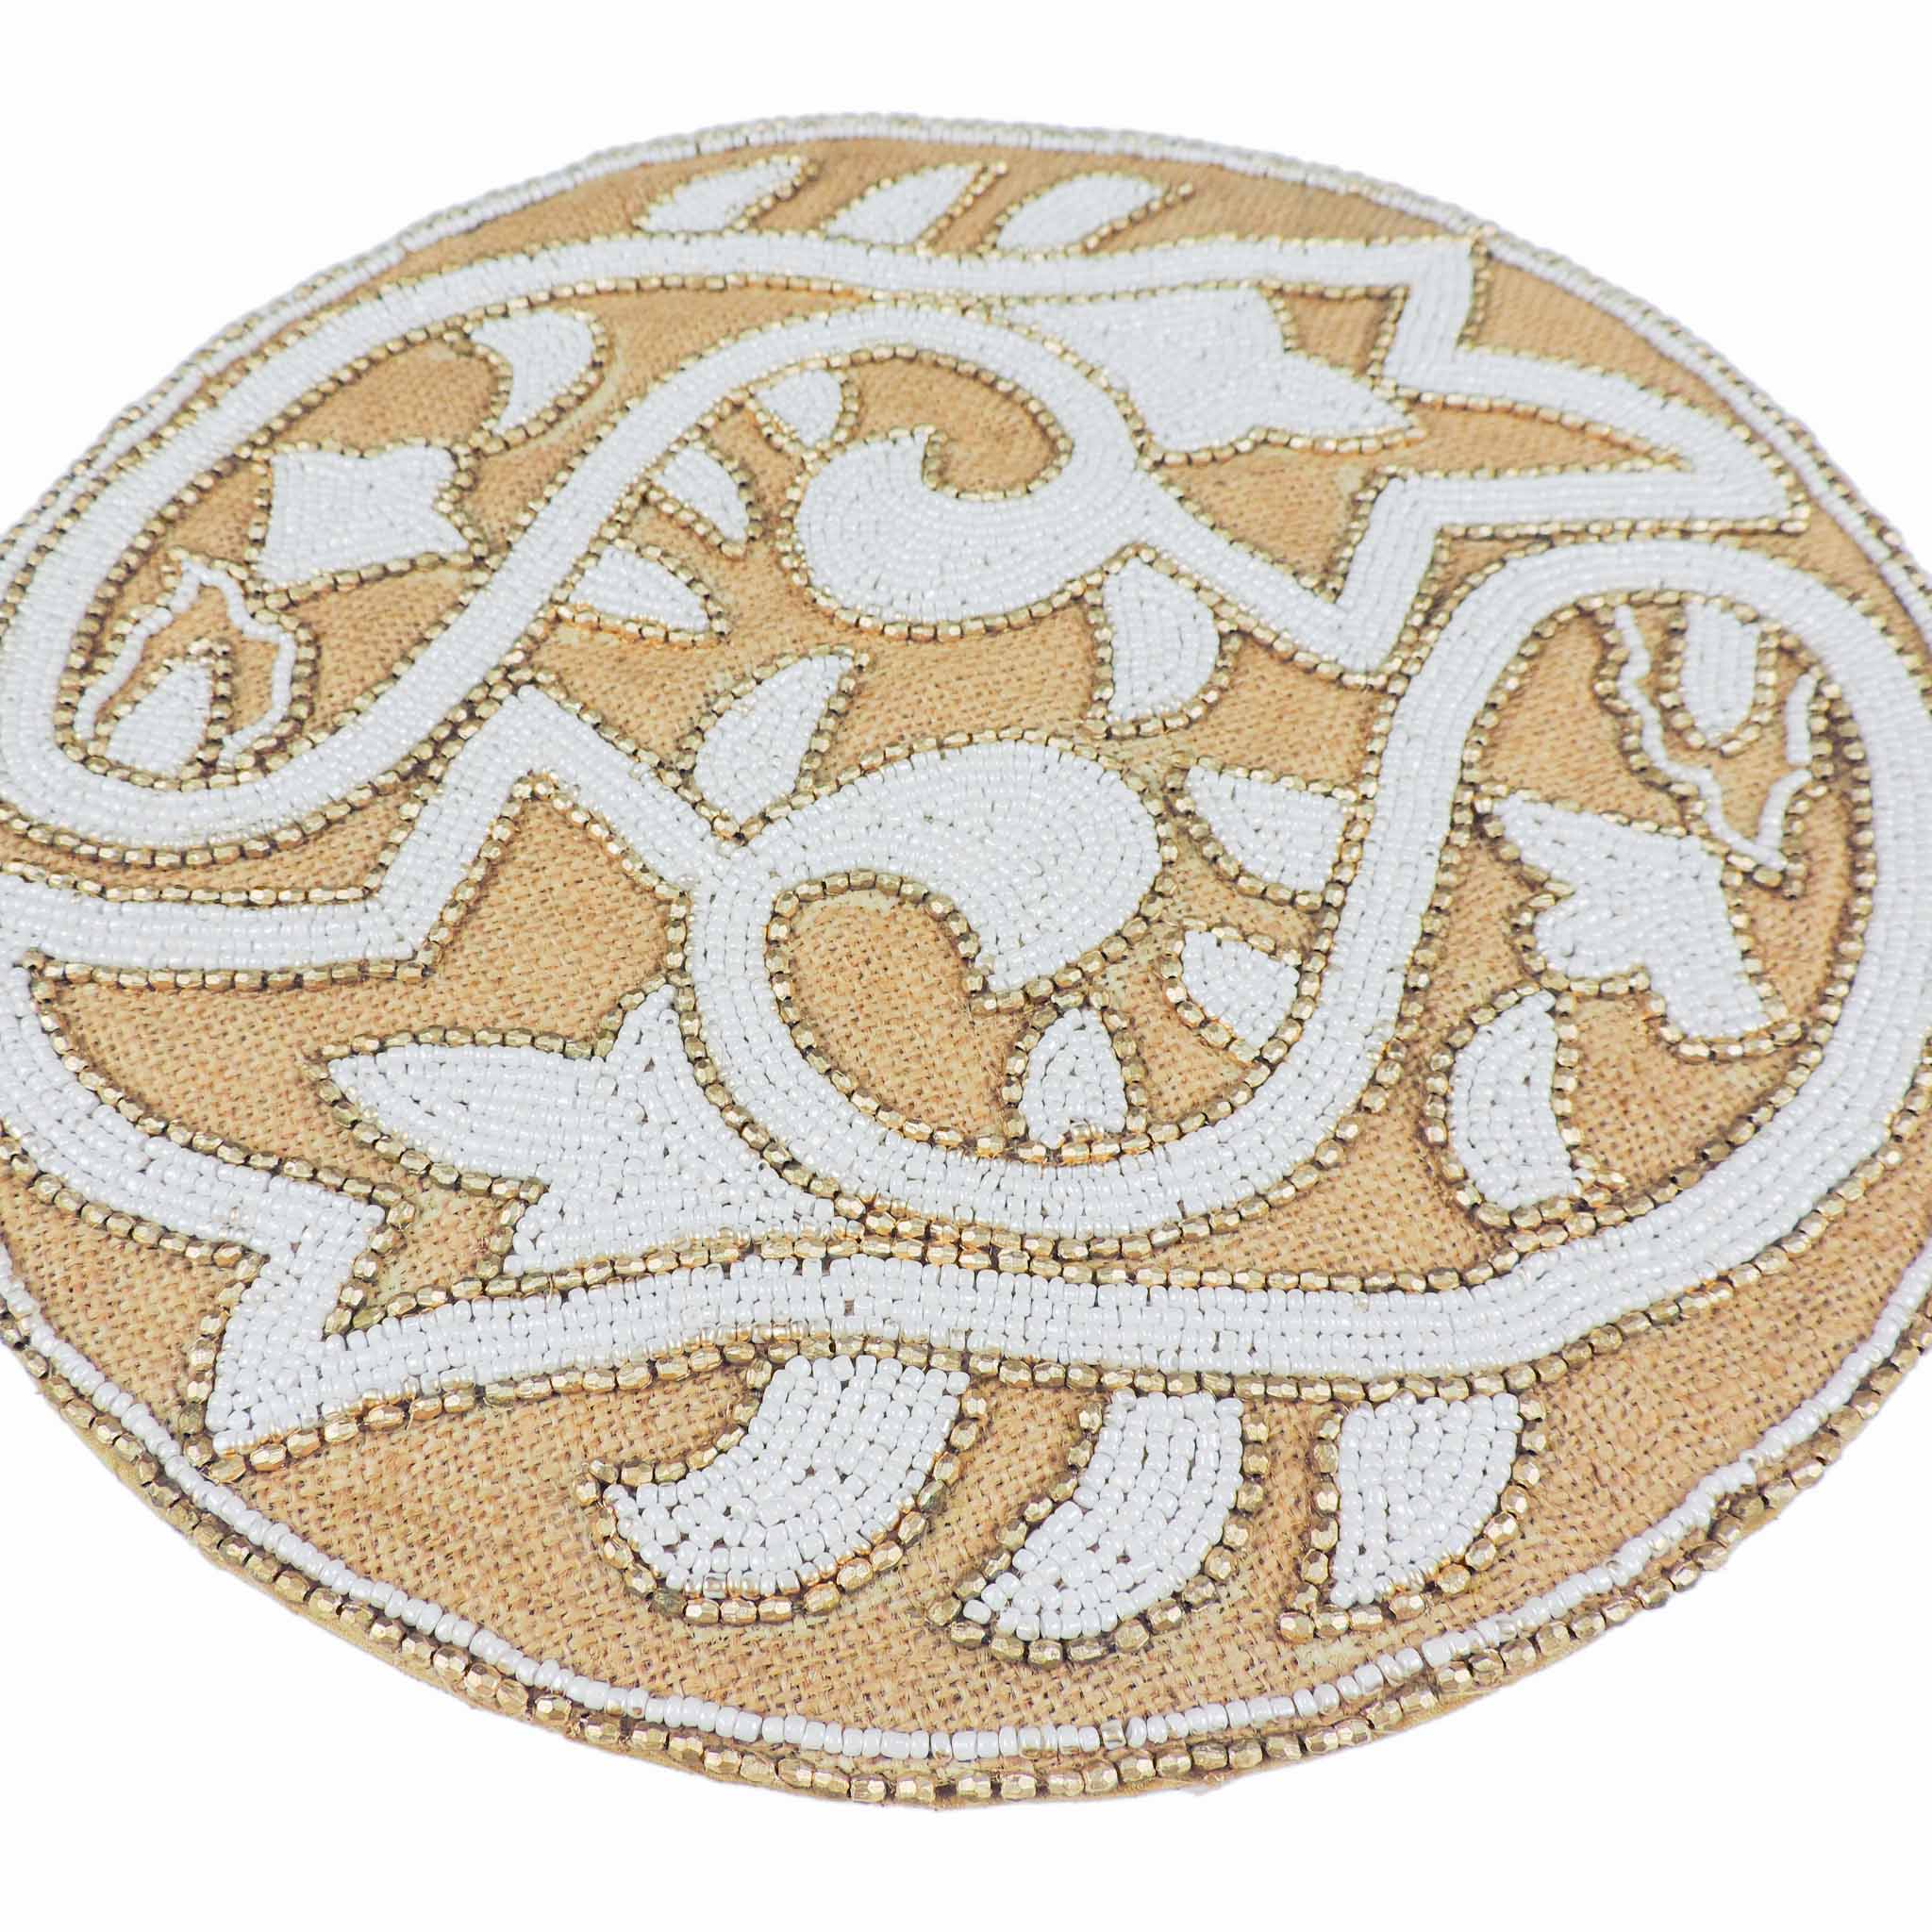 Il Pesce Glass Bead Embroidered Placemat in White & Natural, Set of 2/4